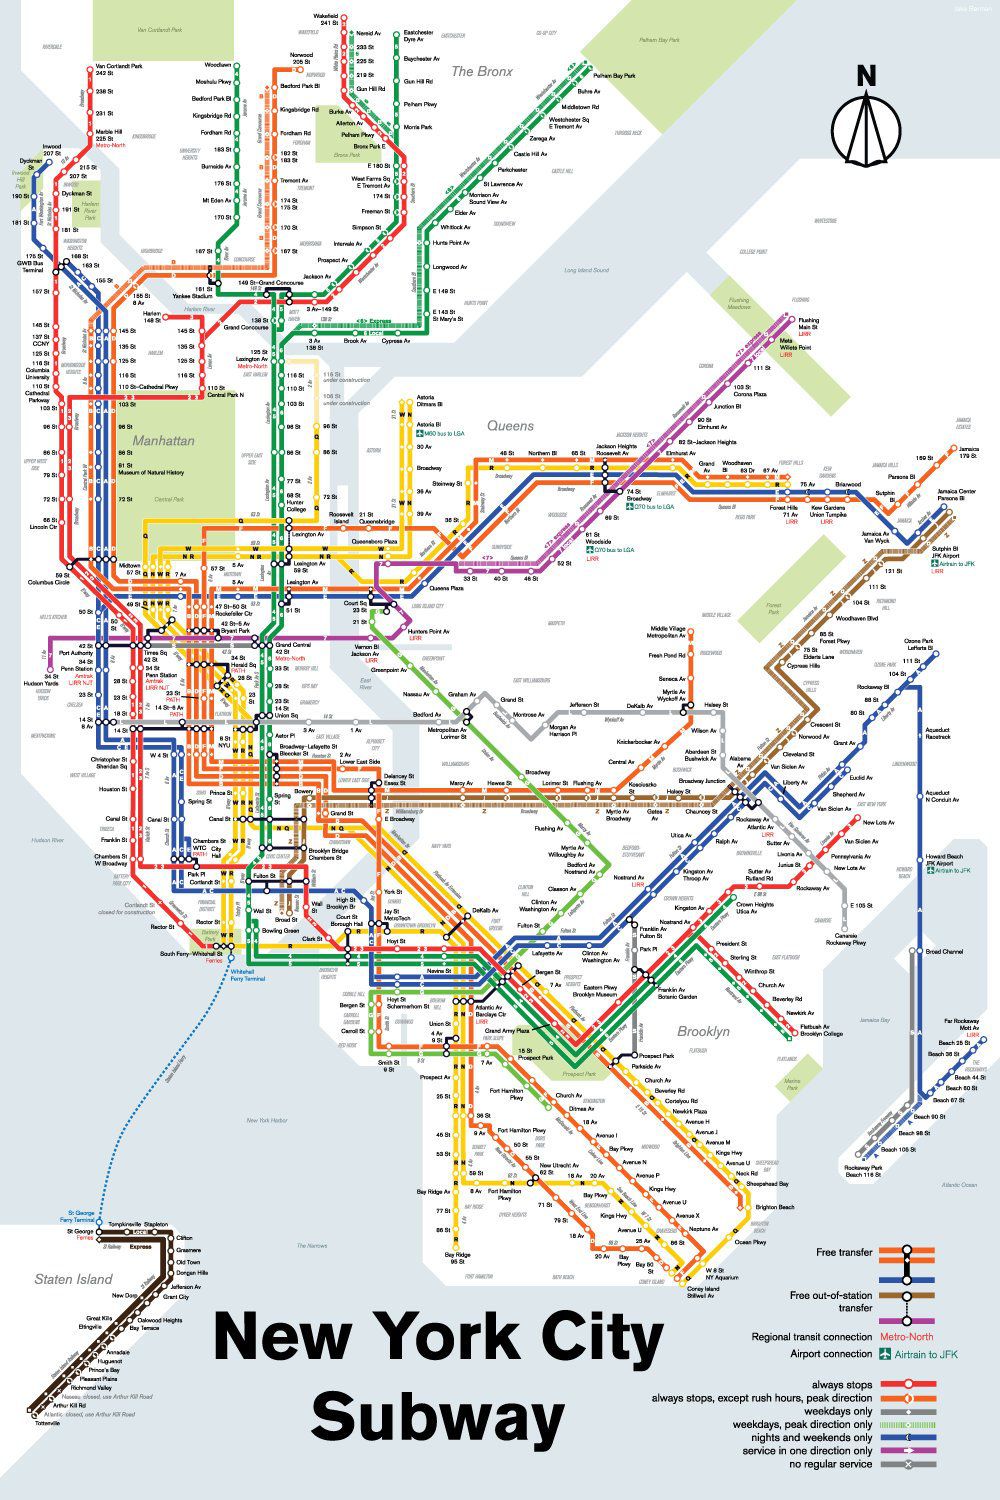 Berman offered this version of the current subway system, which was inspired by Massimo Vignelli's iconic design. What Berman has done is combined lines—for instance, the C and E run on the same line along 8th Avenue.<br>